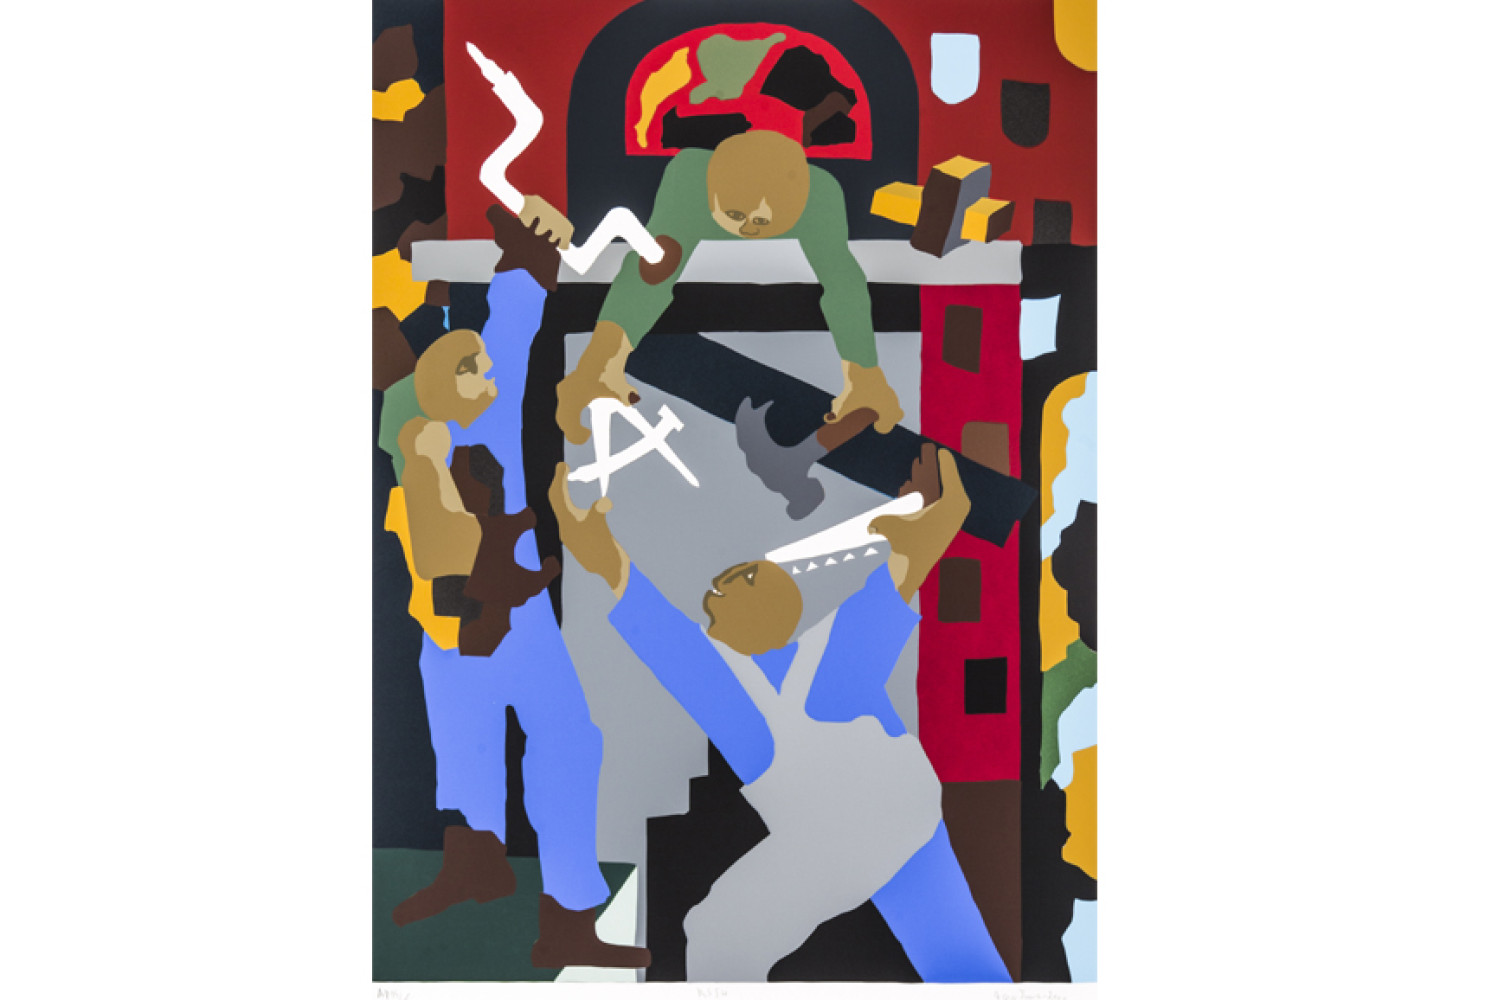 Stained Glass Windows, 2000, by Jacob Lawrence (1917-2000); silkscreen on paper; 32 x 25 inches; Courtesy of The Jacob and Gwendolyn Knight Lawrence Foundation, Seattle © 2015 Artists Rights Society (ARS), New York